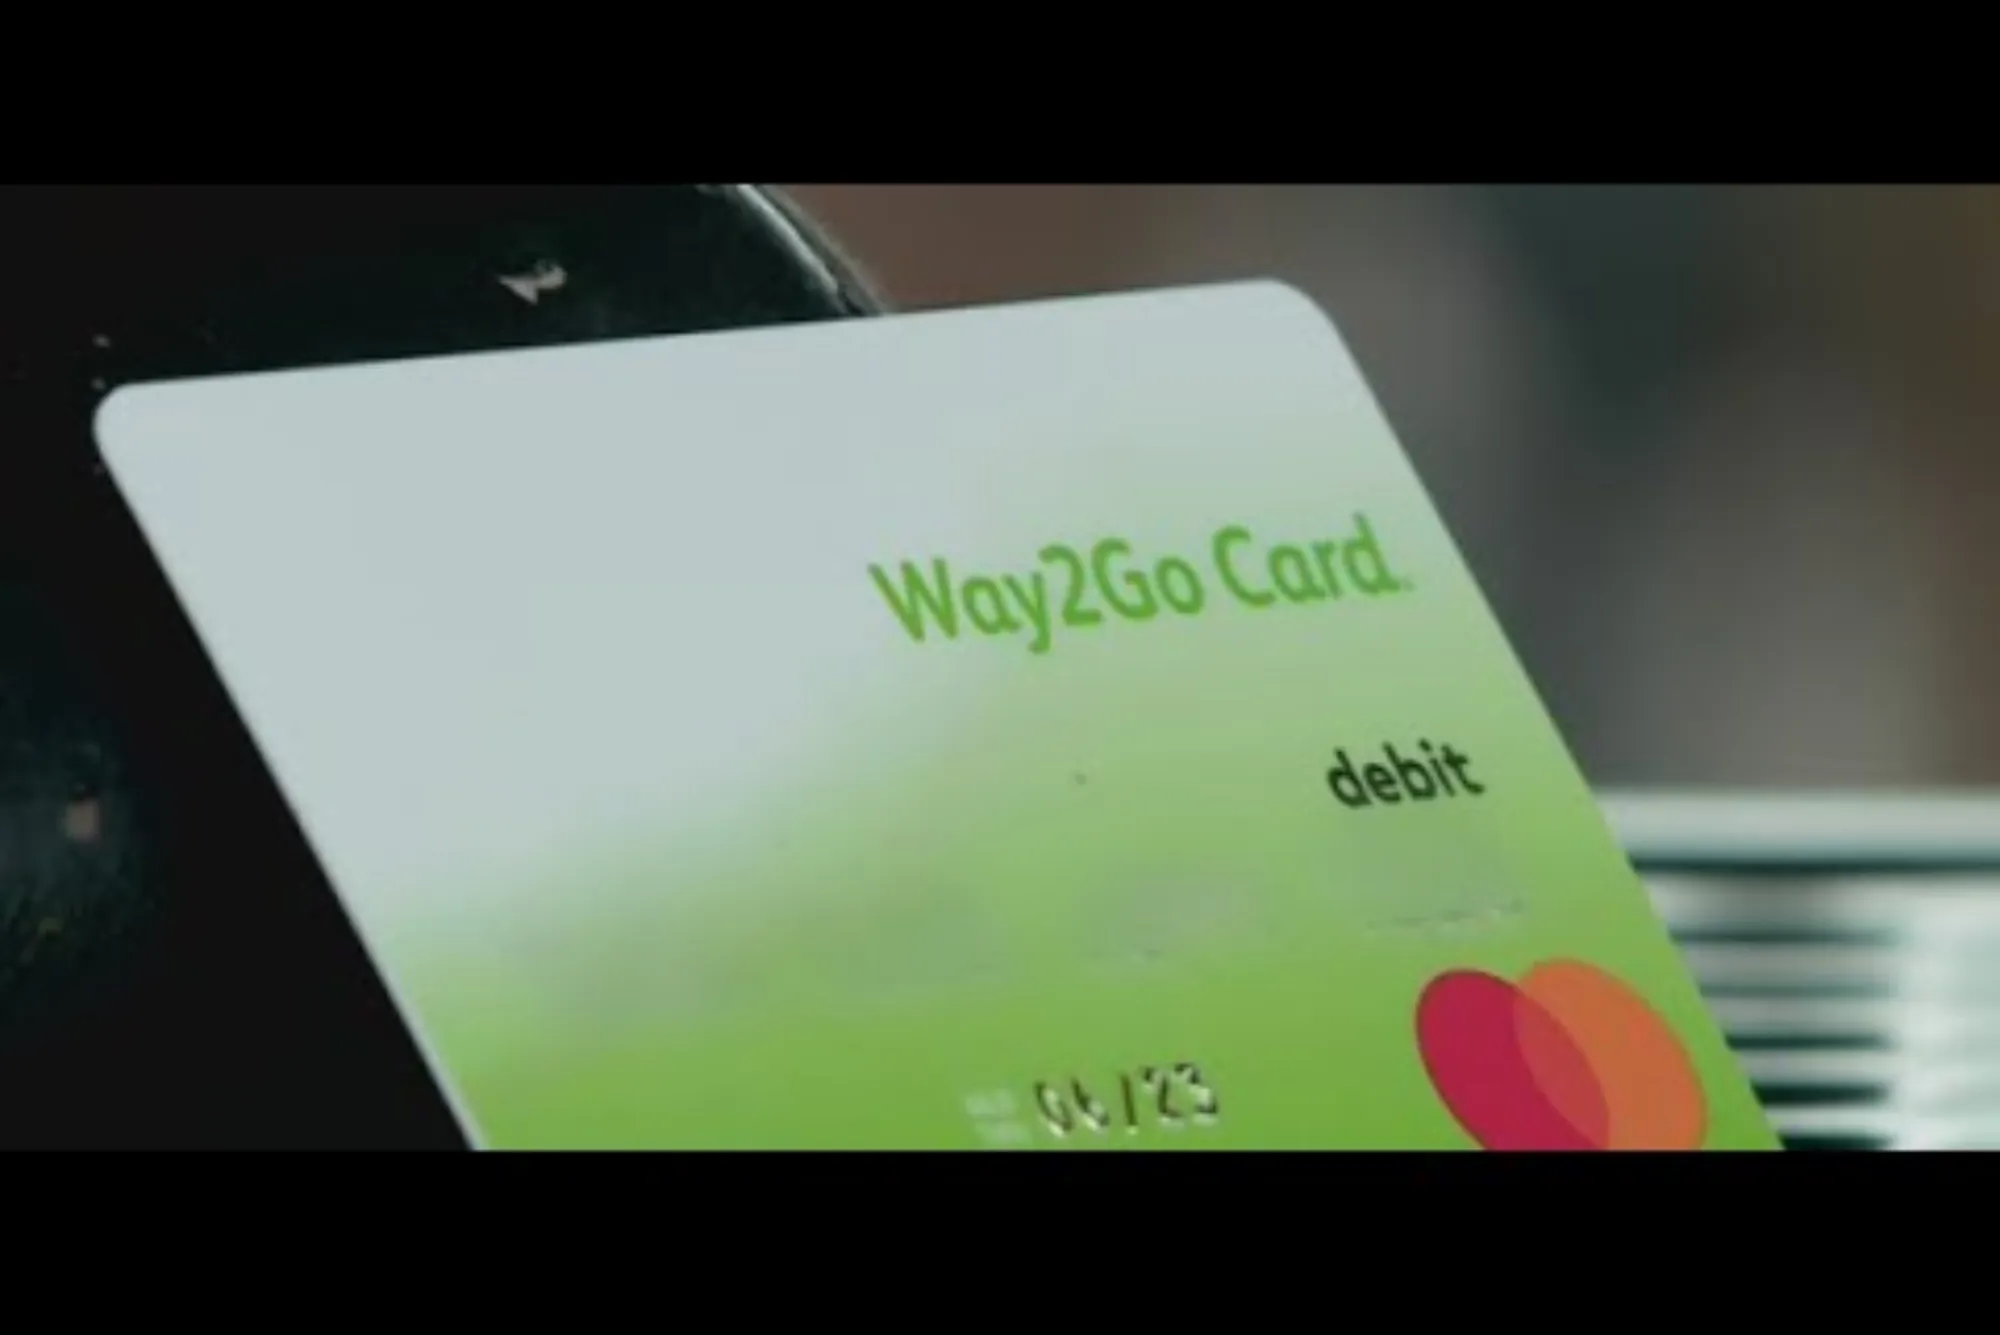 what atm can i use my way2go card for free